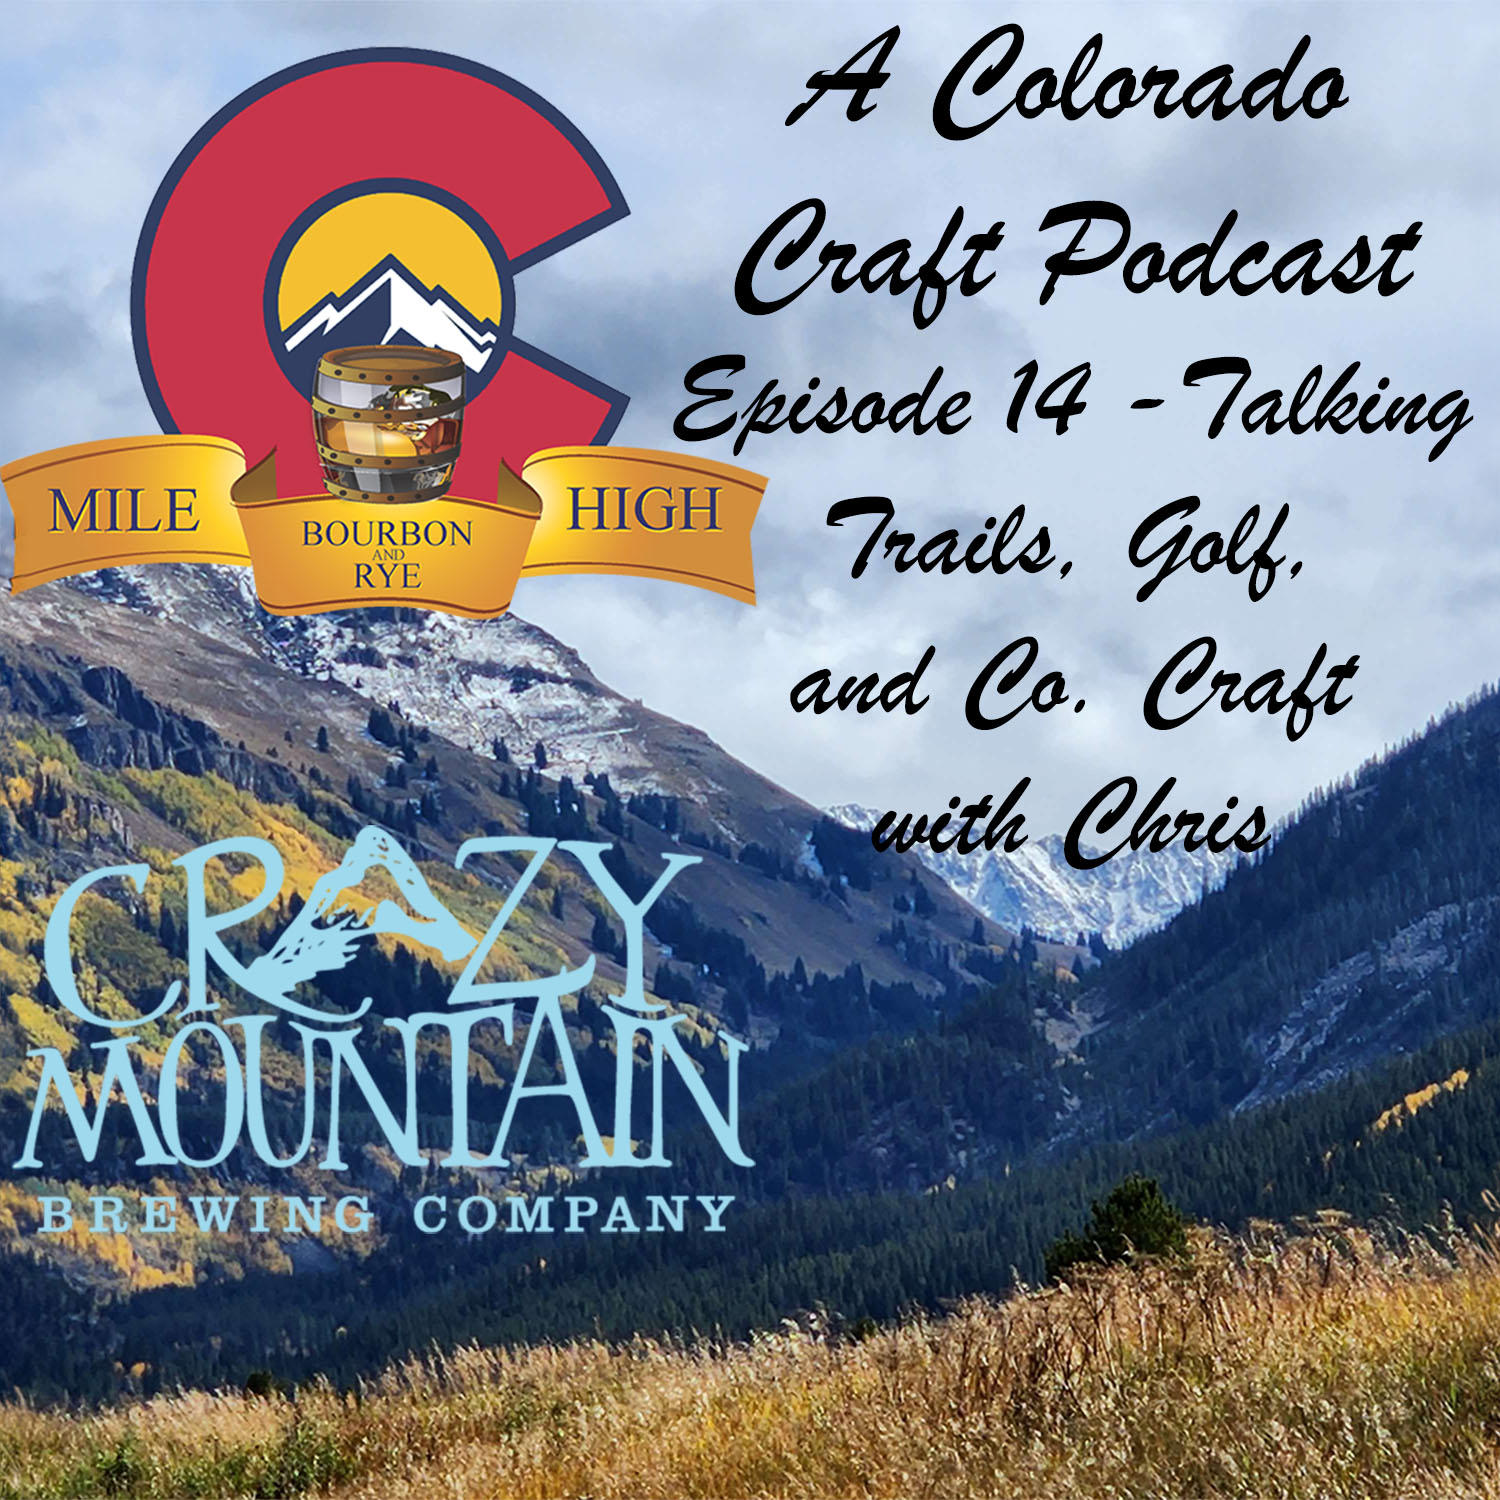 Read more about the article A Colorado Craft Podcast Episode 14 With Chris U.